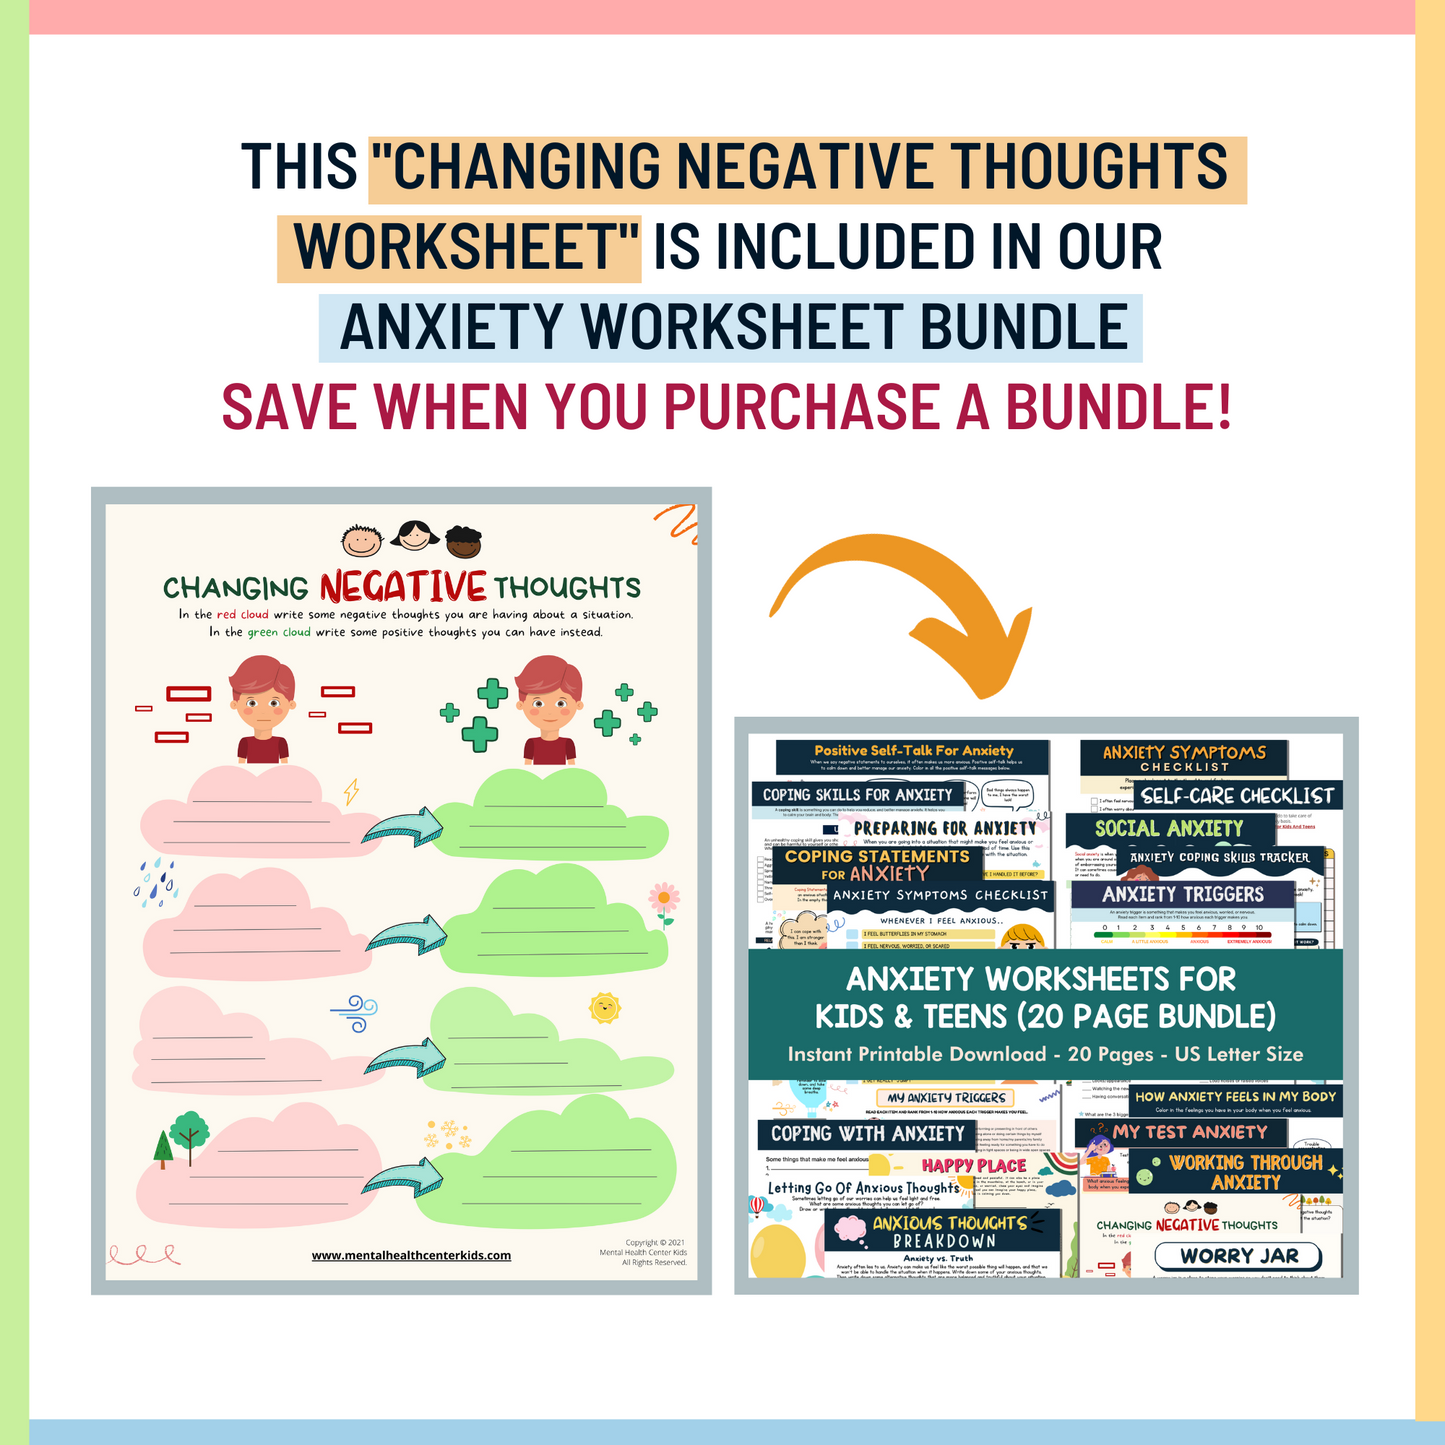 Changing Negative Thoughts to Positive Thoughts Worksheet